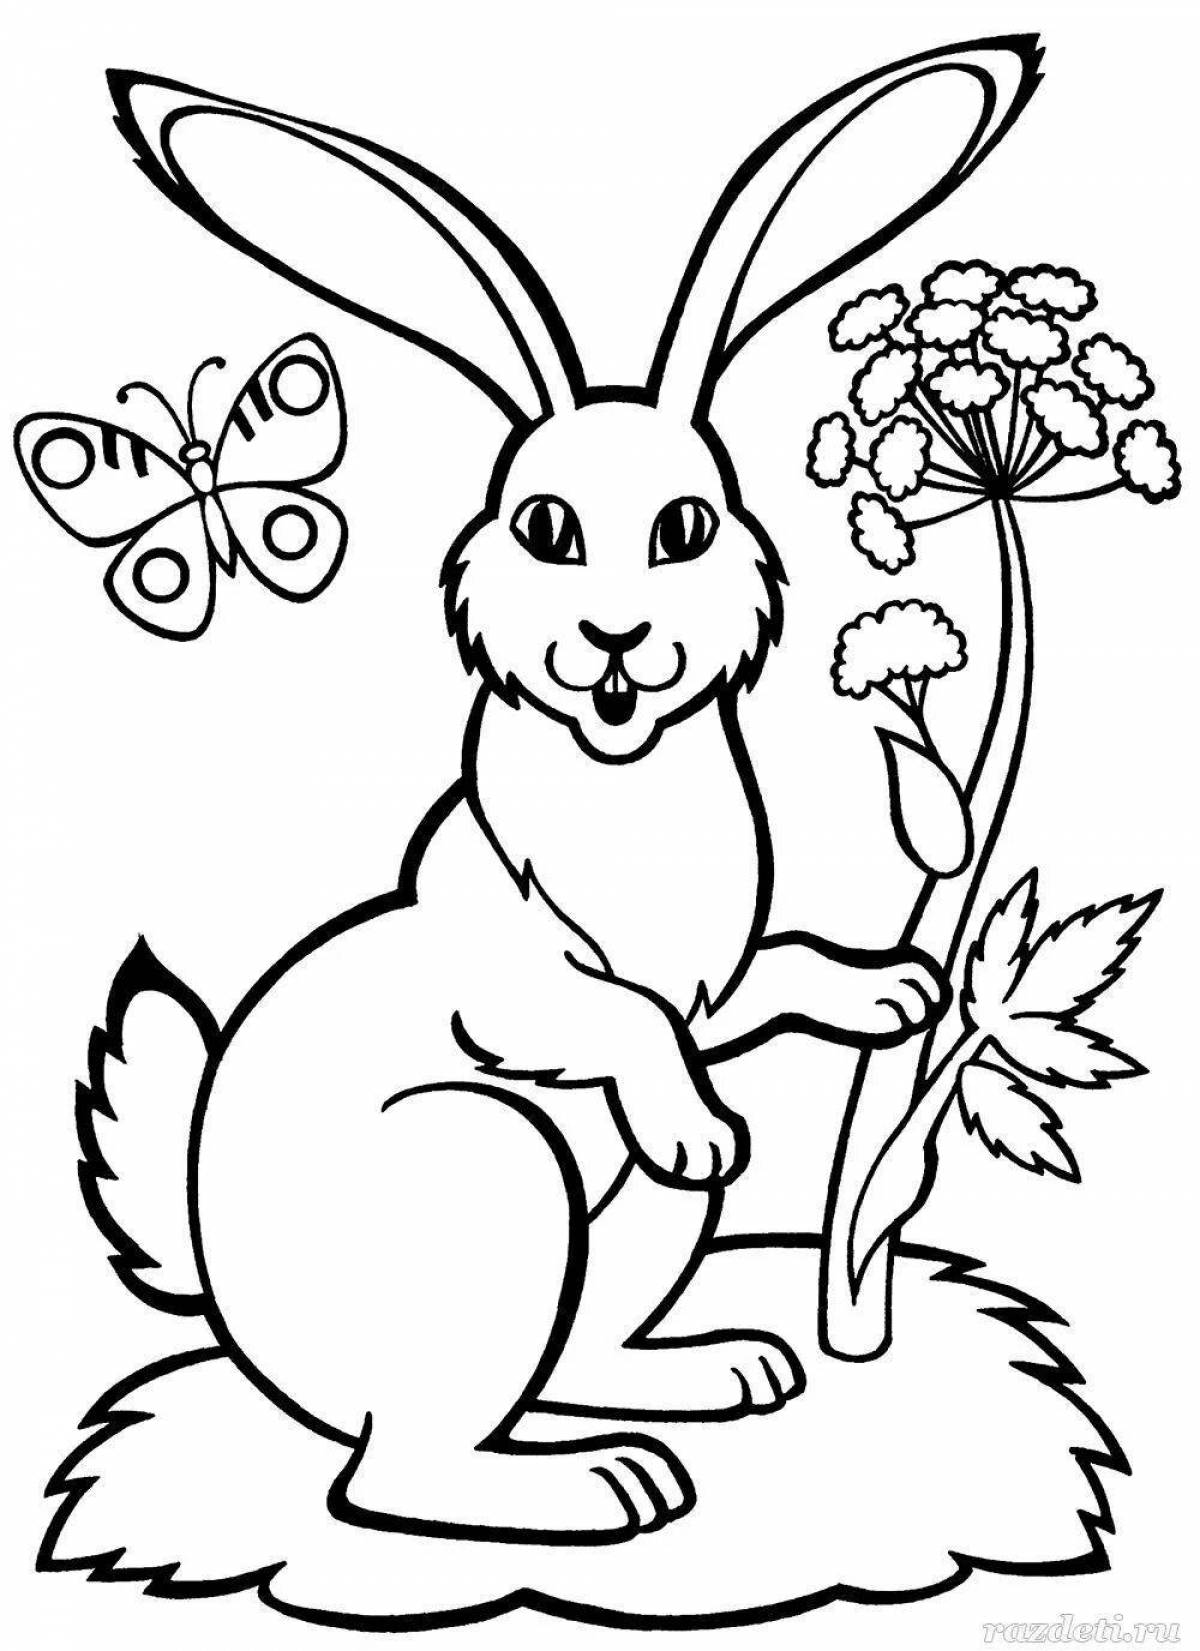 Colorful forest animal coloring page for 3-4 year olds